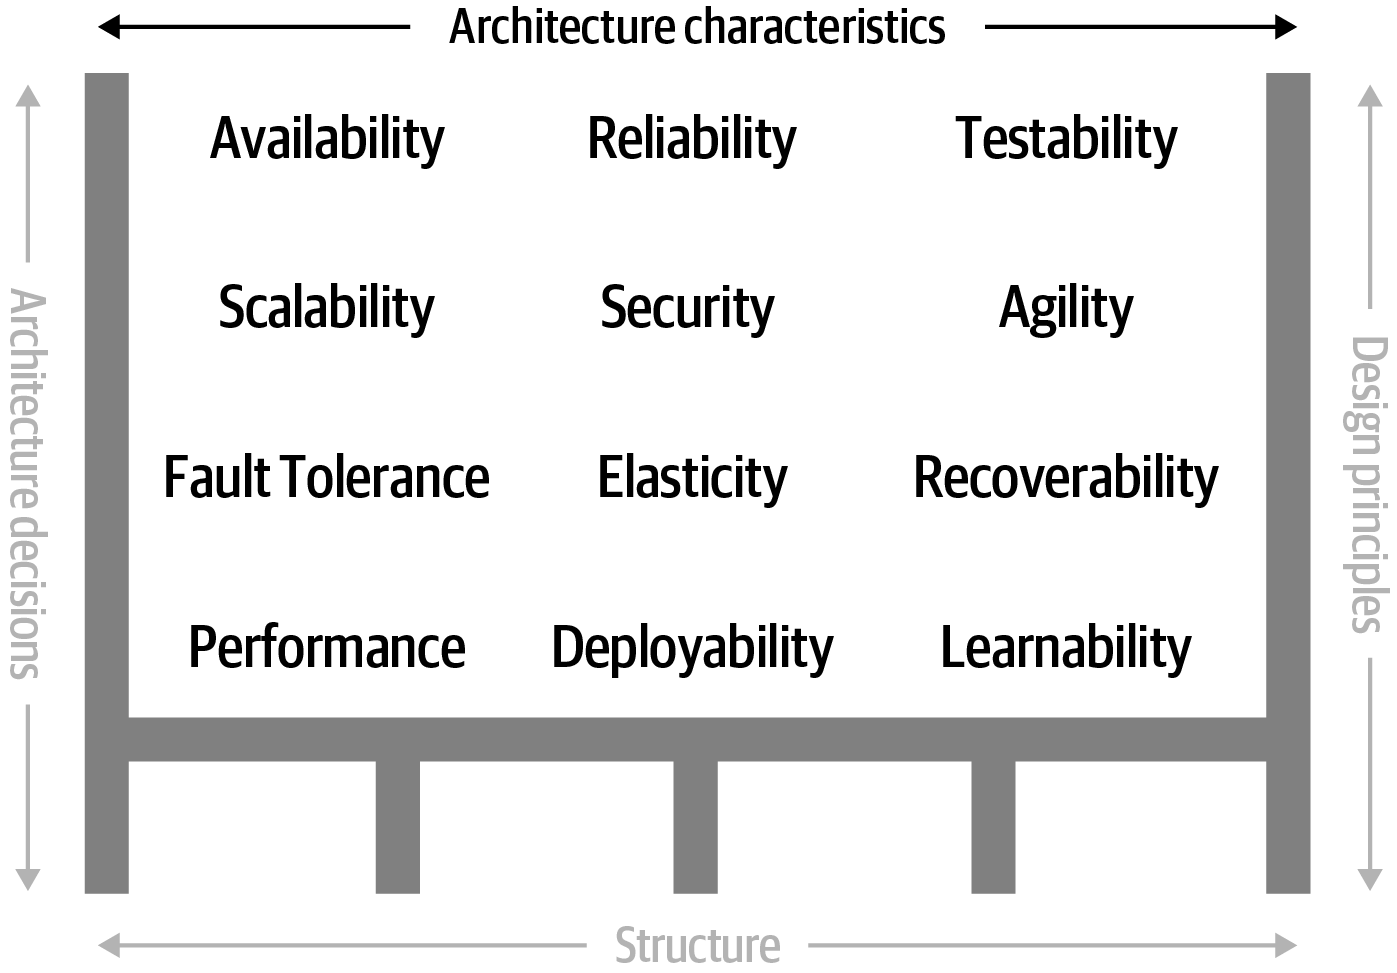 Architecture characteristics refers to the “-ilities” that the system must support